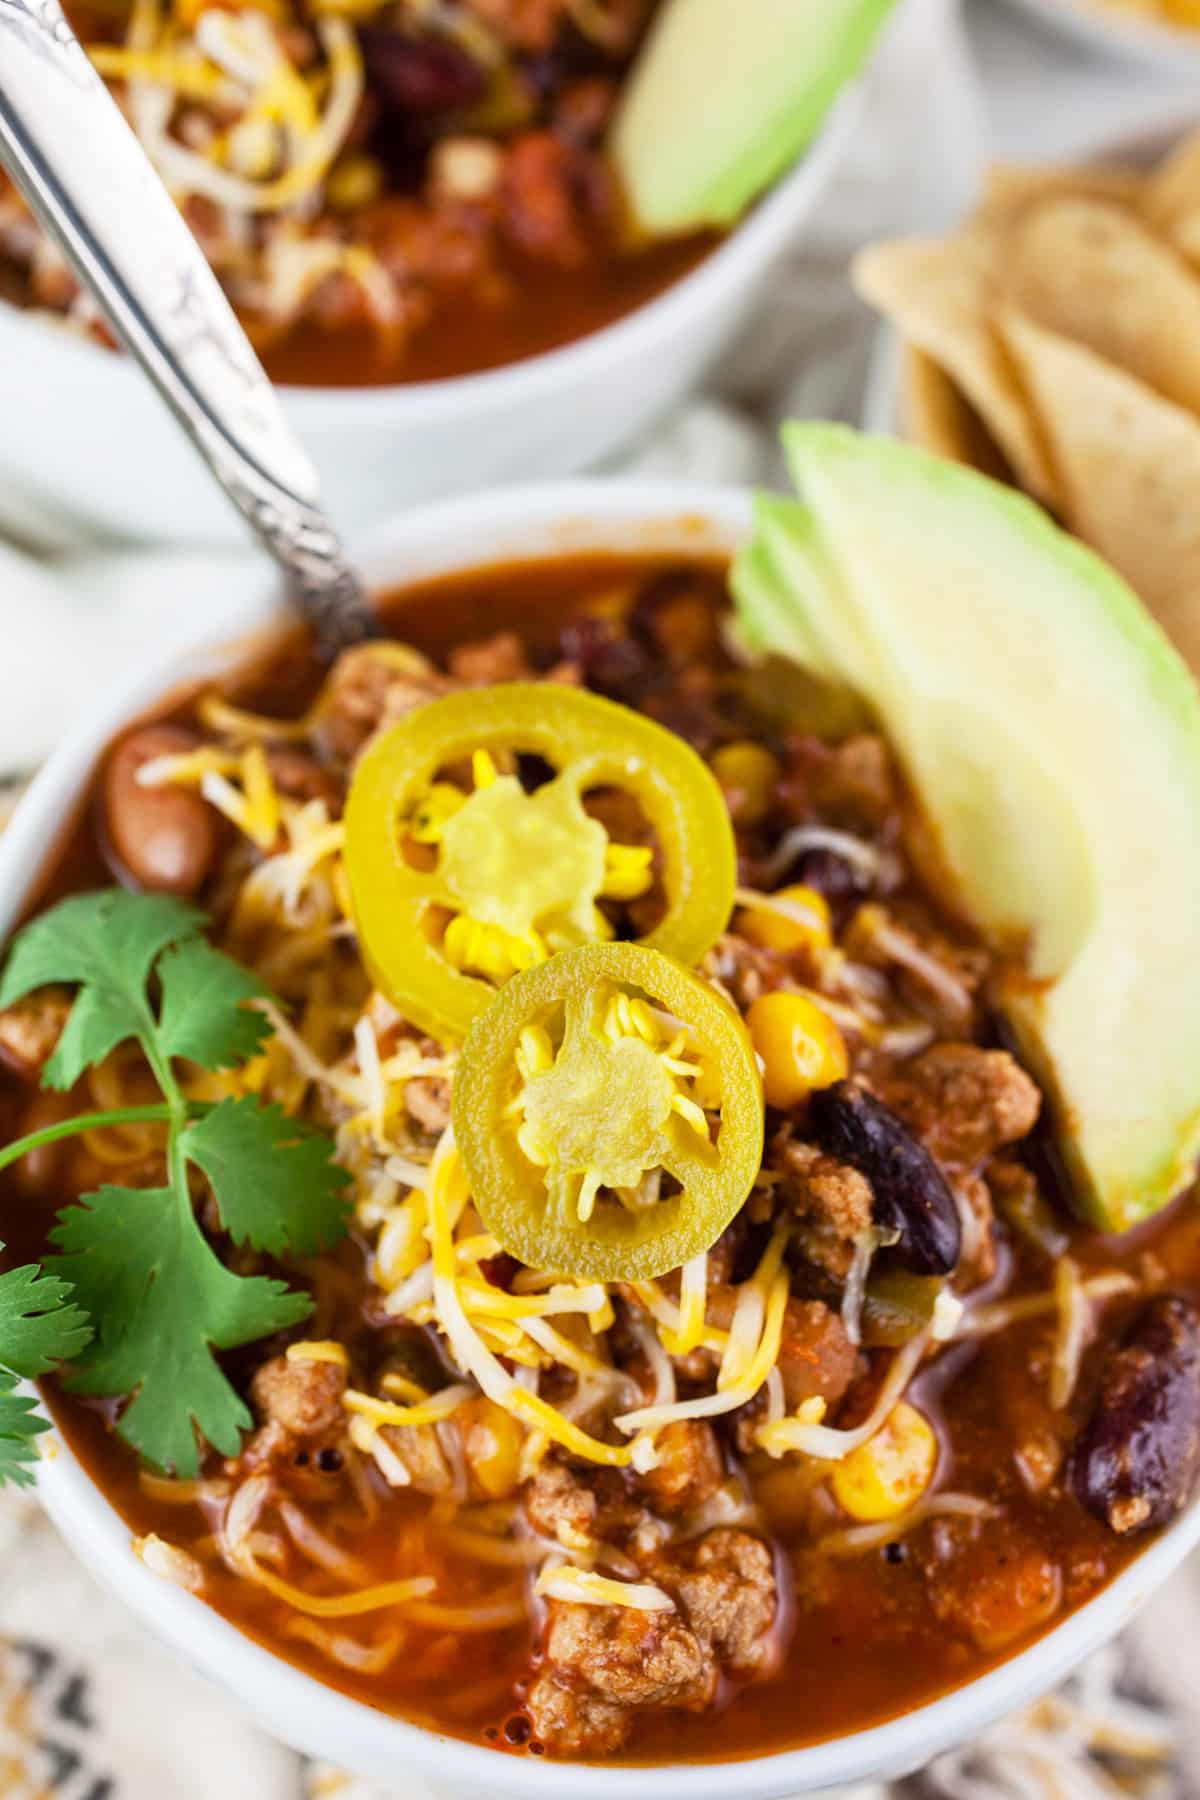 Turkey chili in white bowls with sliced avocado, cilantro, shredded cheese, and pickled jalapenos.